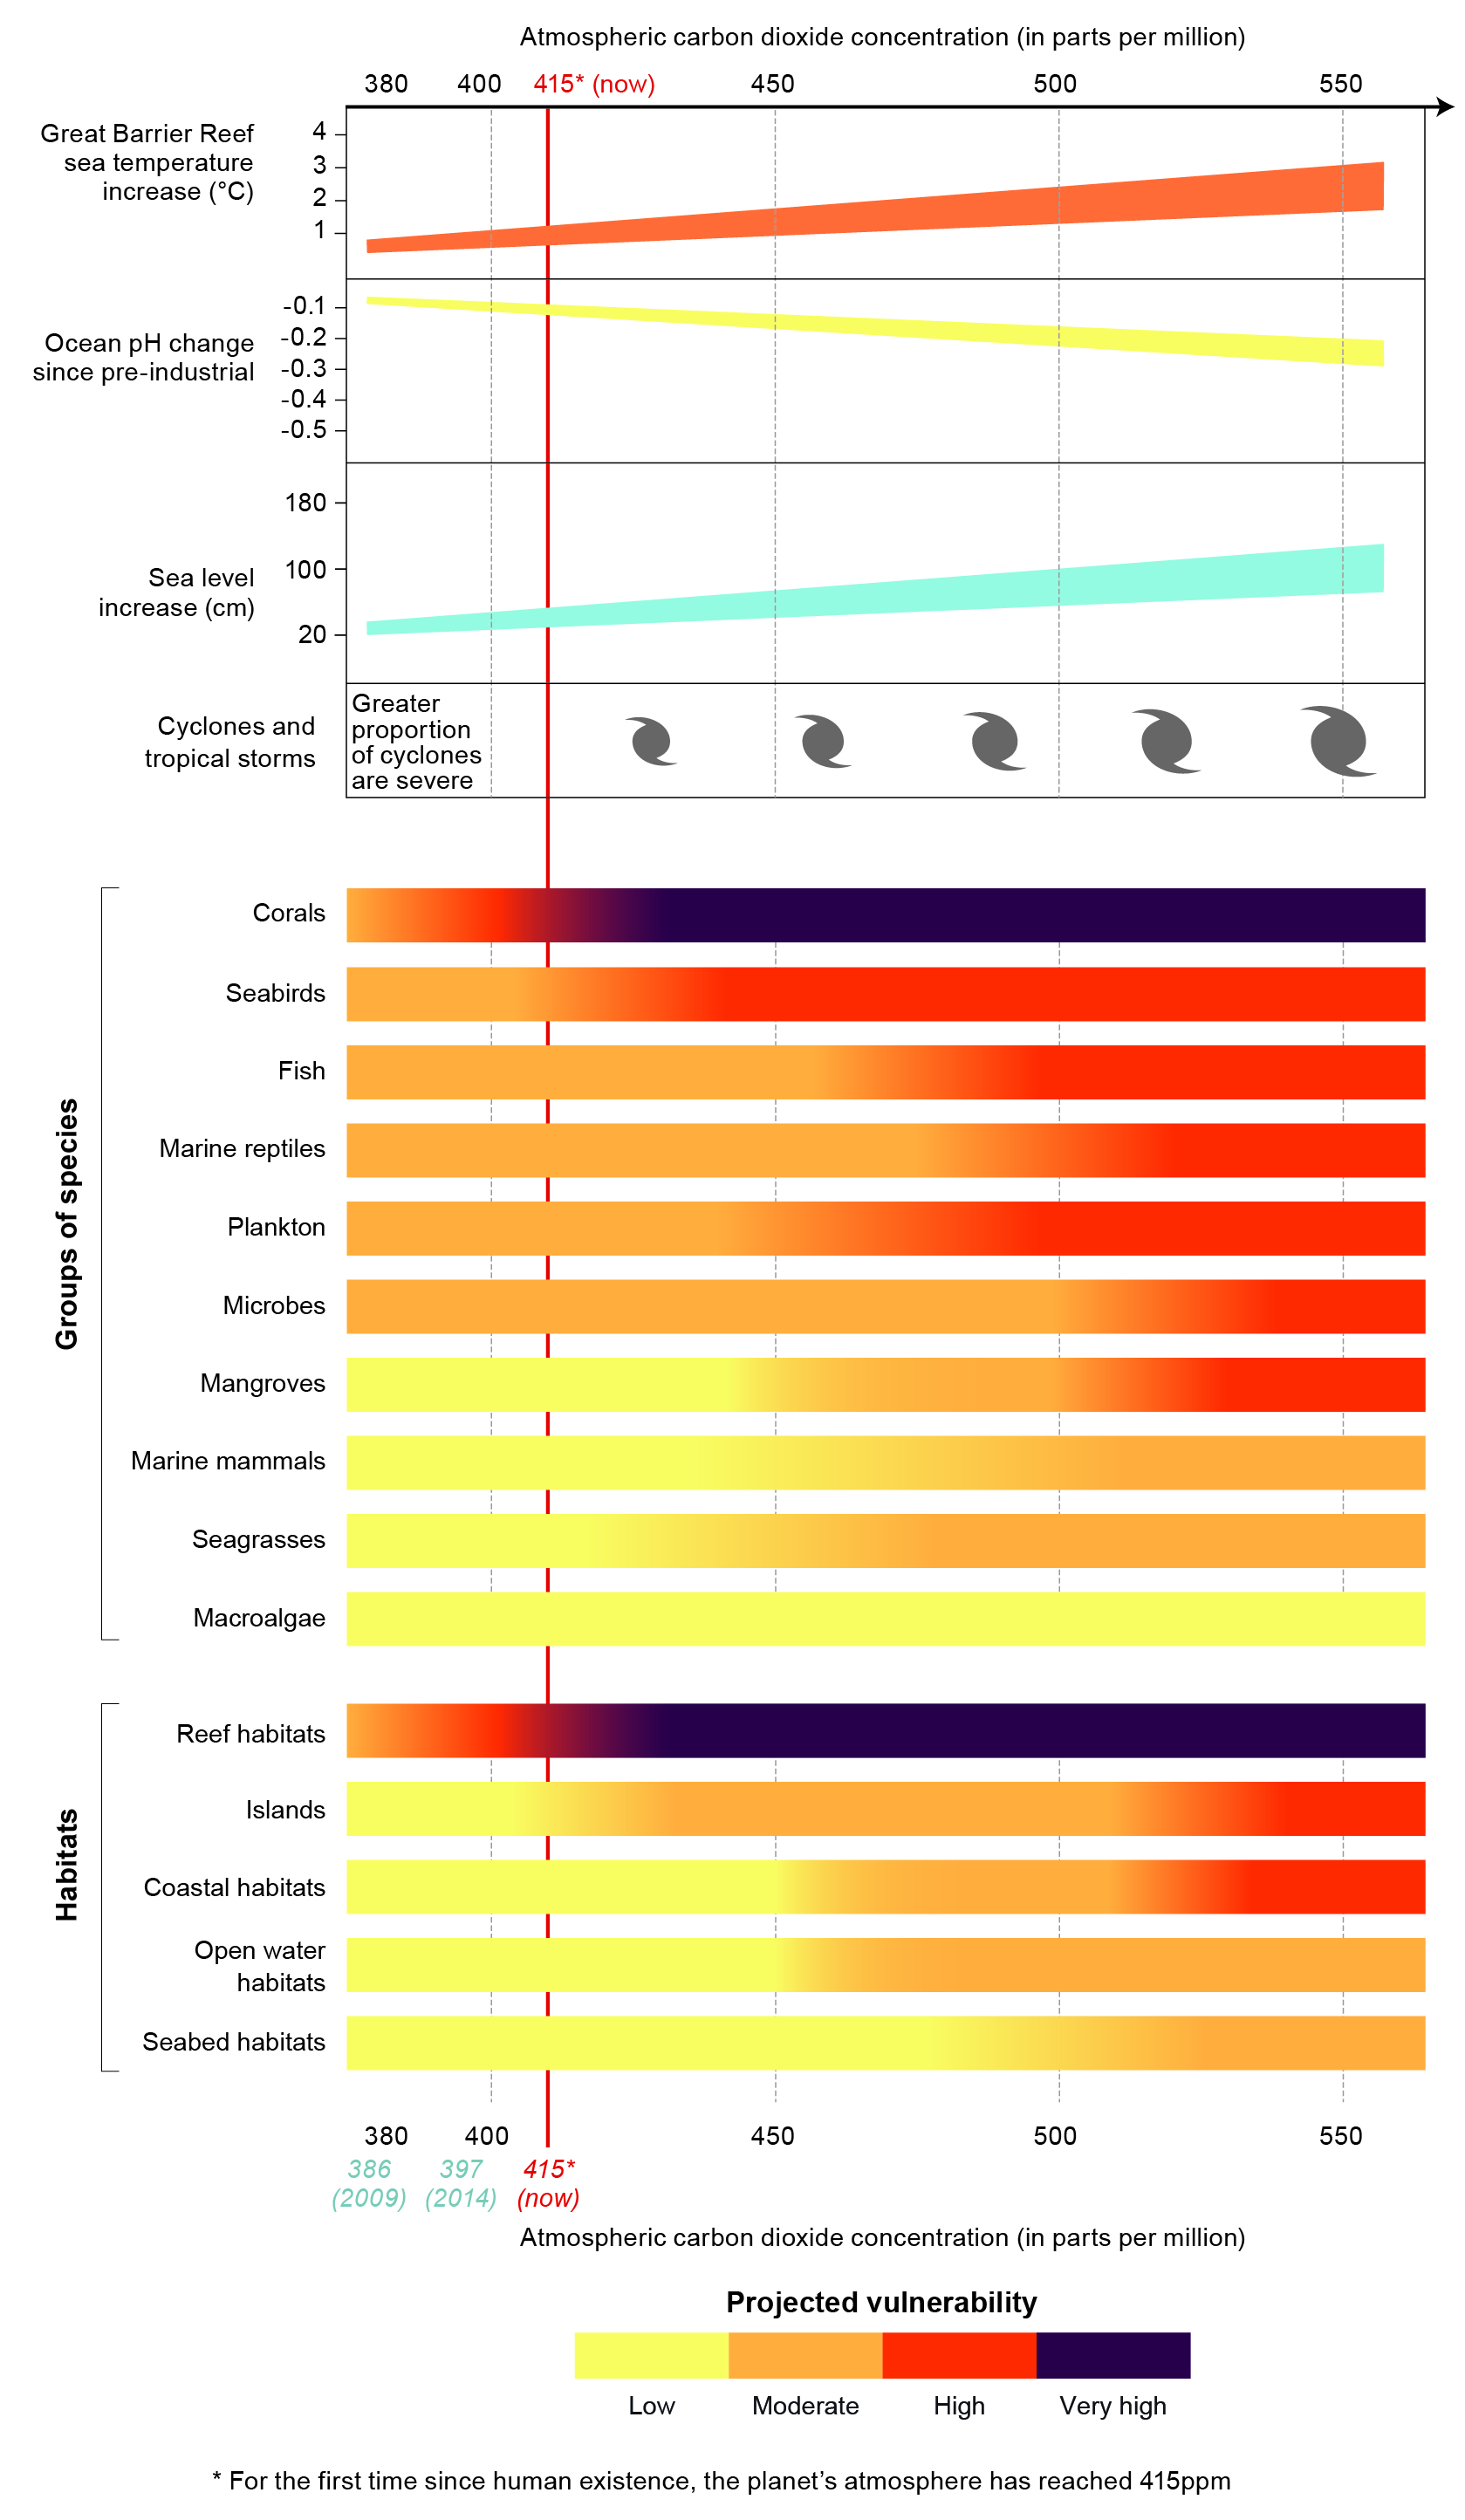 <strong>Projected vulnerabilities of components of the Reef ecosystem to climate change.</strong> Source: Great Barrier Reef Outlook Report 2019.<br><em>Vulnerability differs for a number of ecosystem components and depends on total atmospheric carbon dioxide concentrations. Changes in sea temperatures, ocean pH and sea level are indicative only, based on the latest climate projections.</em>